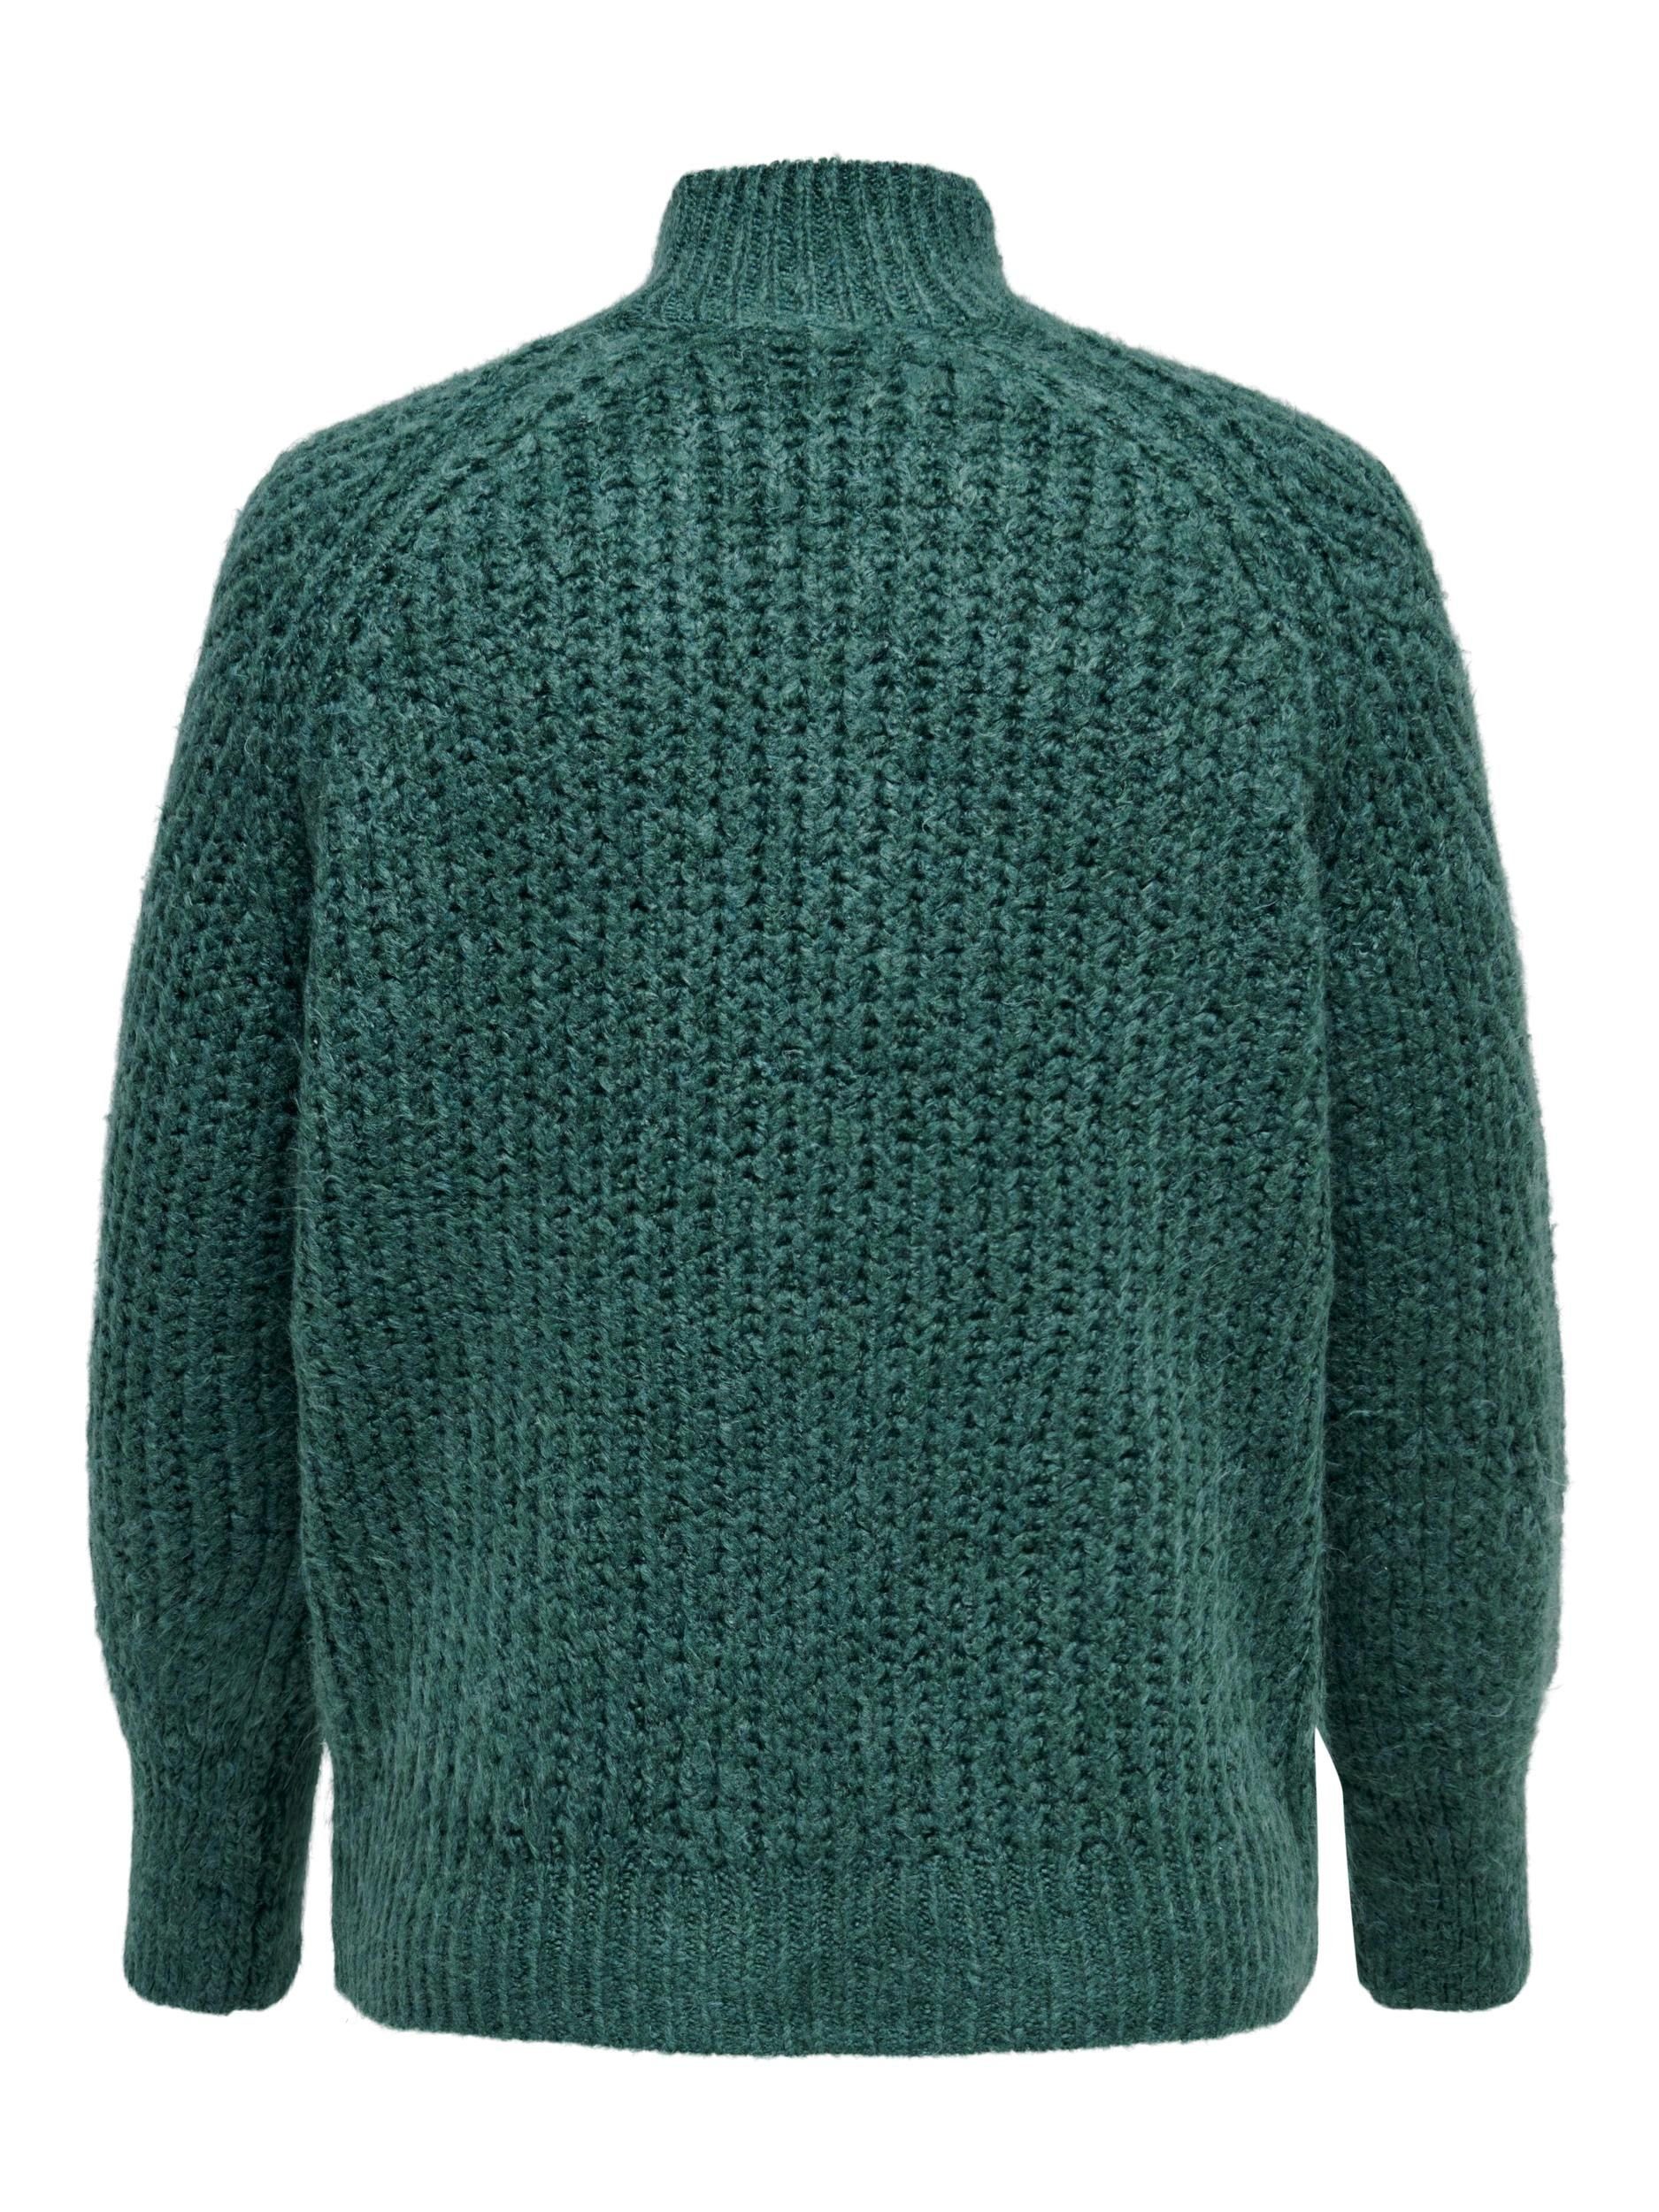 ONLY CARMAKOMA Strickpullover